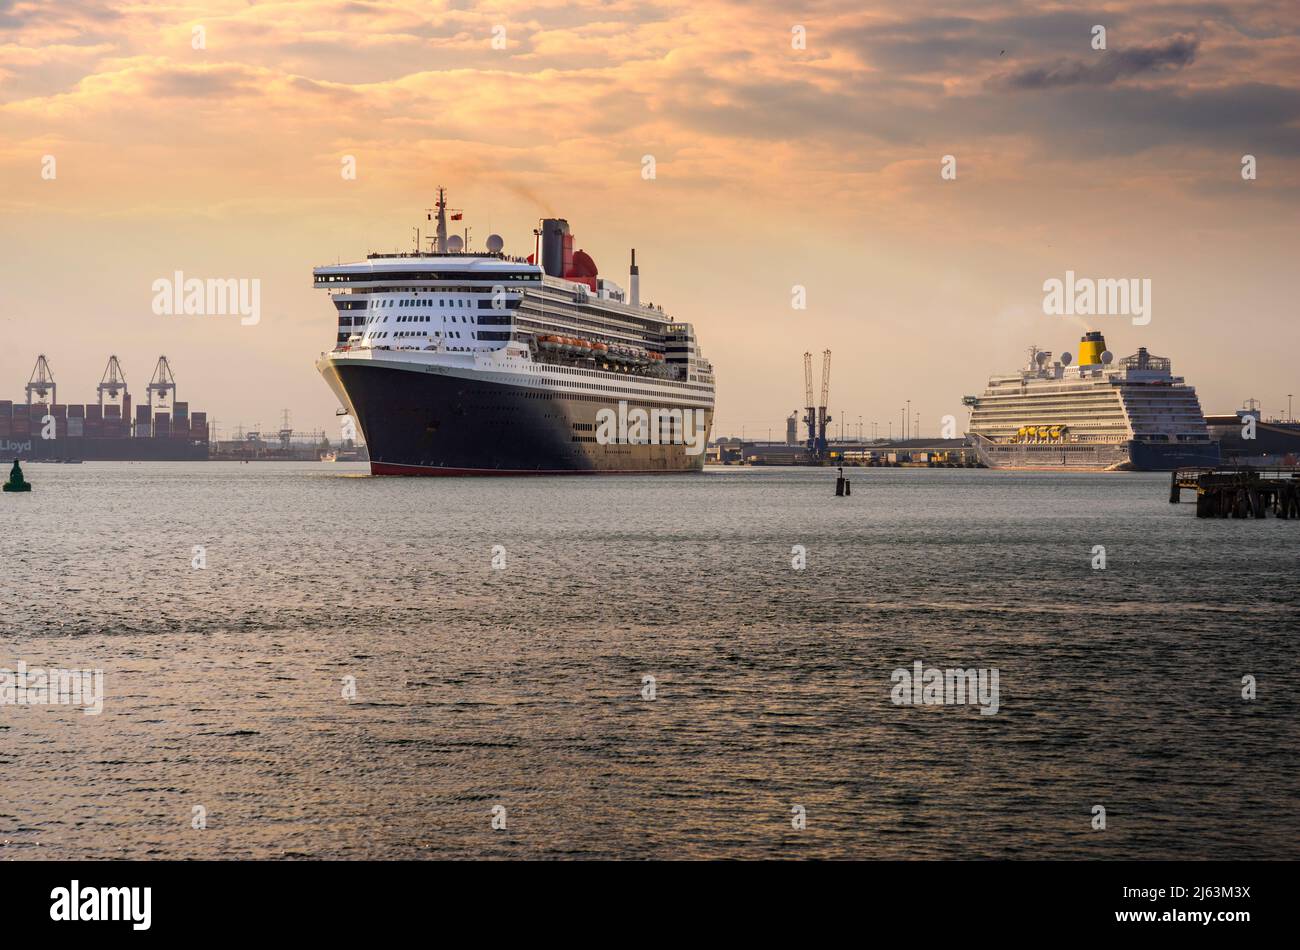 Cunard liner Queen Mary 2 passing Saga cruise ship Spirit of Adventure as she departs Southampton for New York on 24 April 2022. Southampton, England Stock Photo